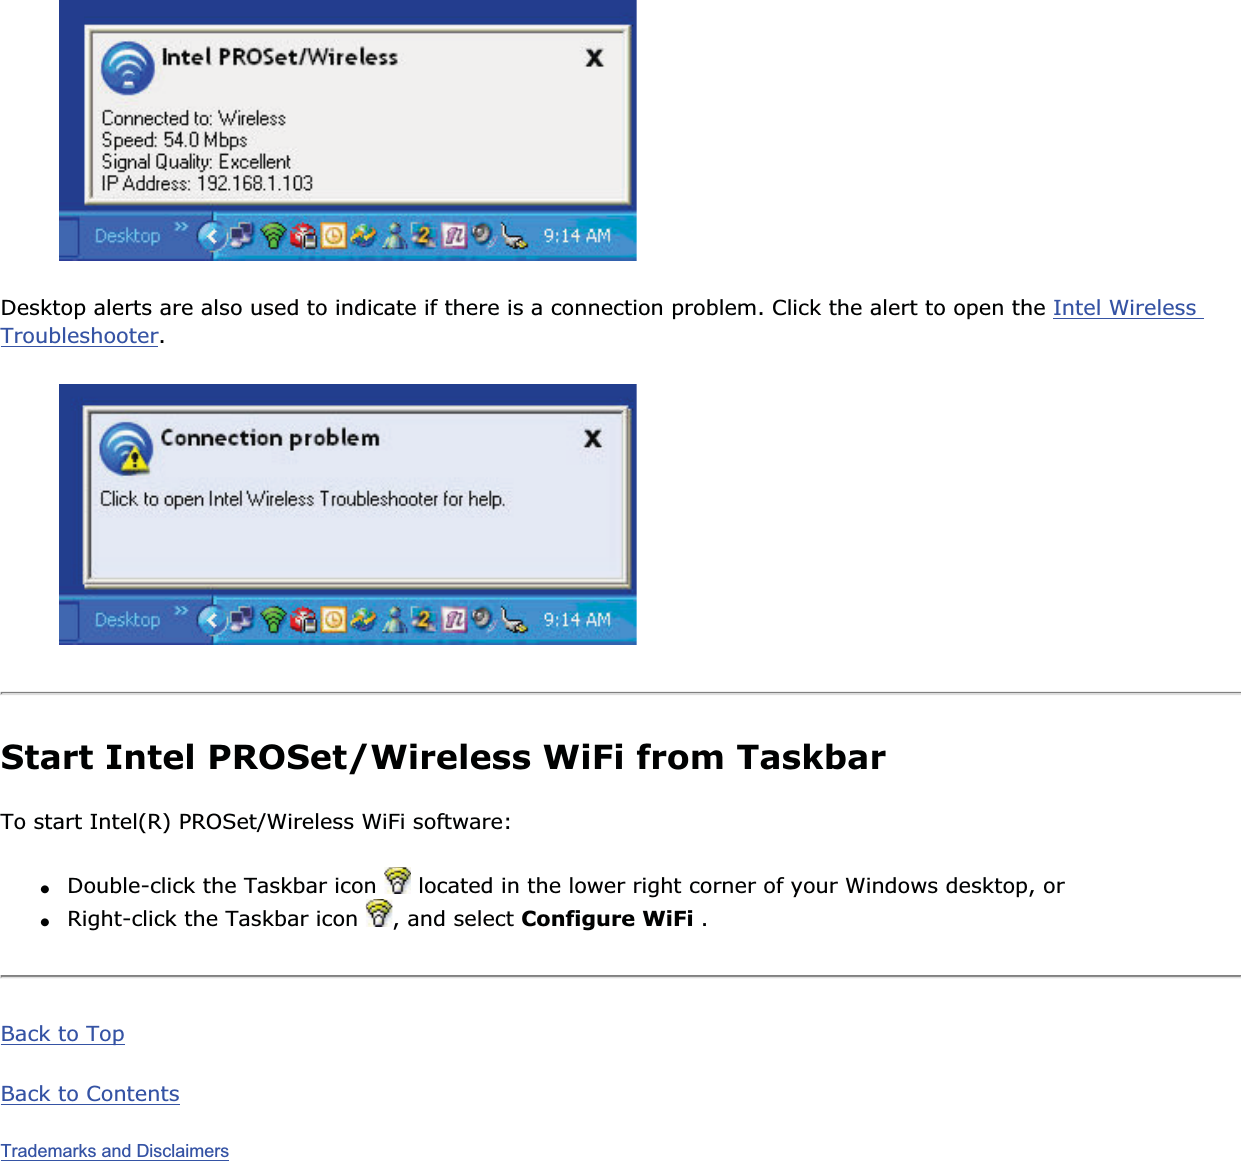 Desktop alerts are also used to indicate if there is a connection problem. Click the alert to open the Intel Wireless Troubleshooter.Start Intel PROSet/Wireless WiFi from TaskbarTo start Intel(R) PROSet/Wireless WiFi software: ●Double-click the Taskbar icon   located in the lower right corner of your Windows desktop, or ●Right-click the Taskbar icon  , and select Configure WiFi .Back to TopBack to ContentsTrademarks and Disclaimers